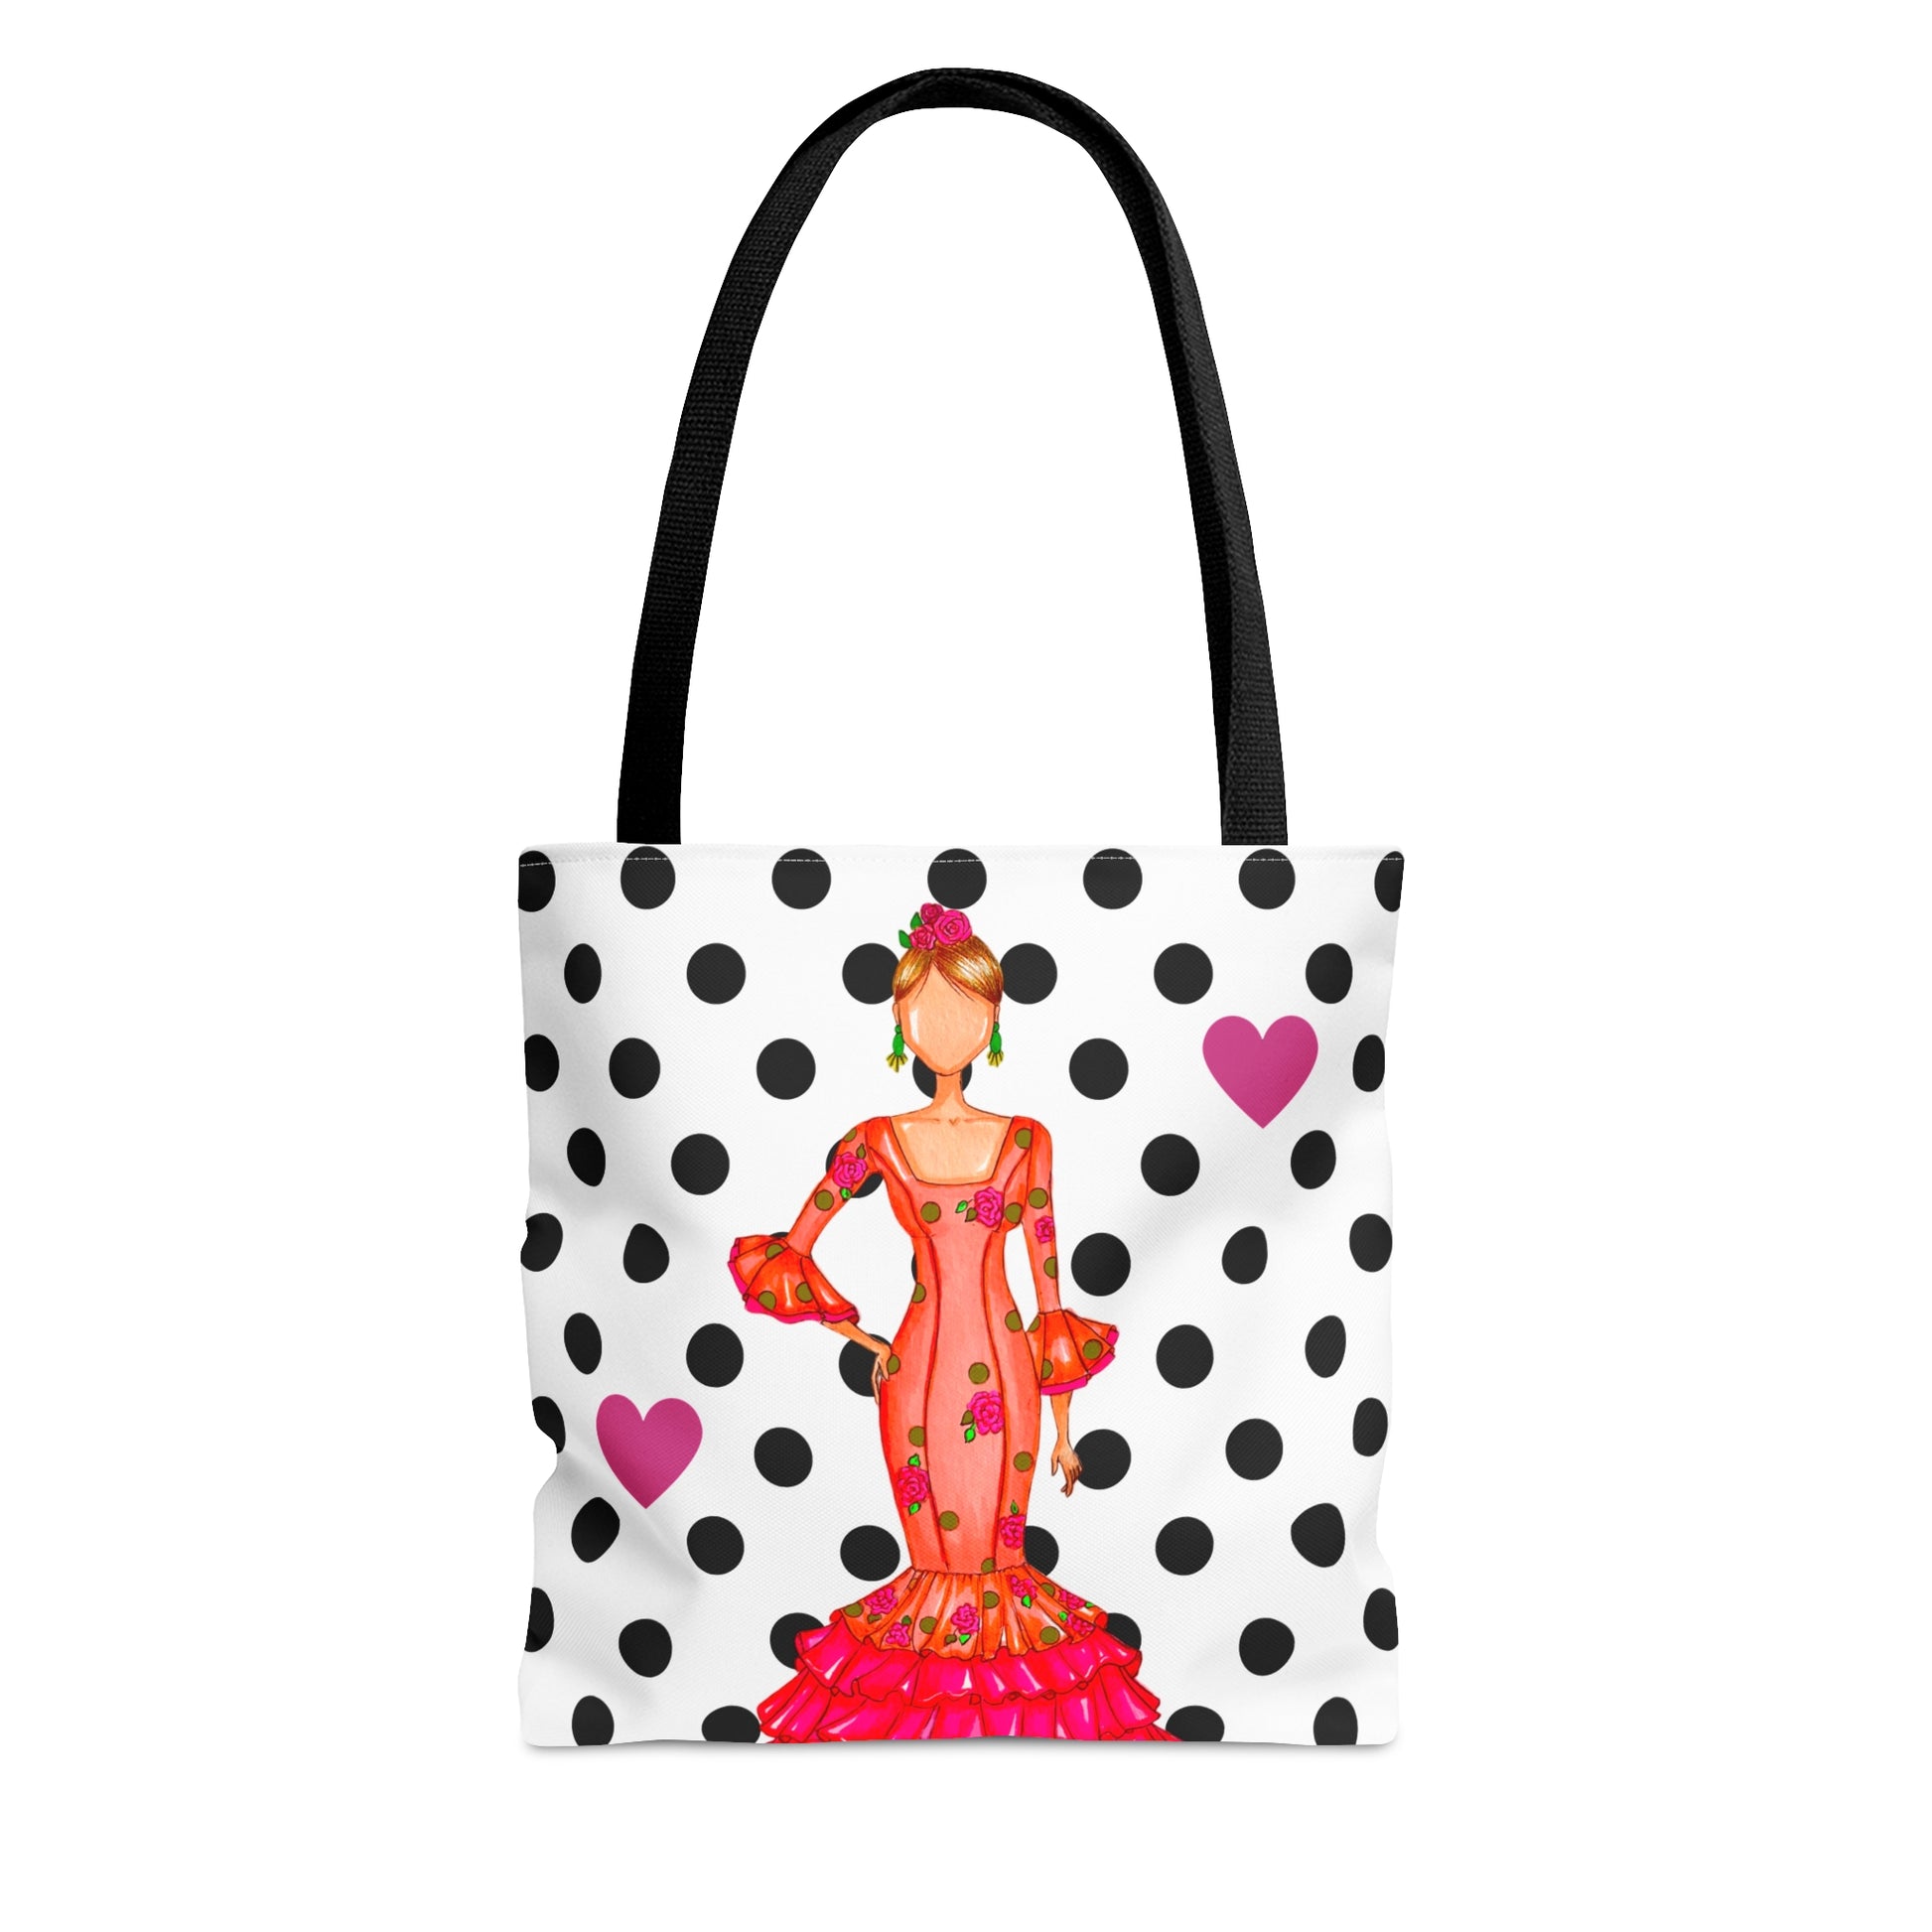 a tote bag with a woman in a polka dot dress